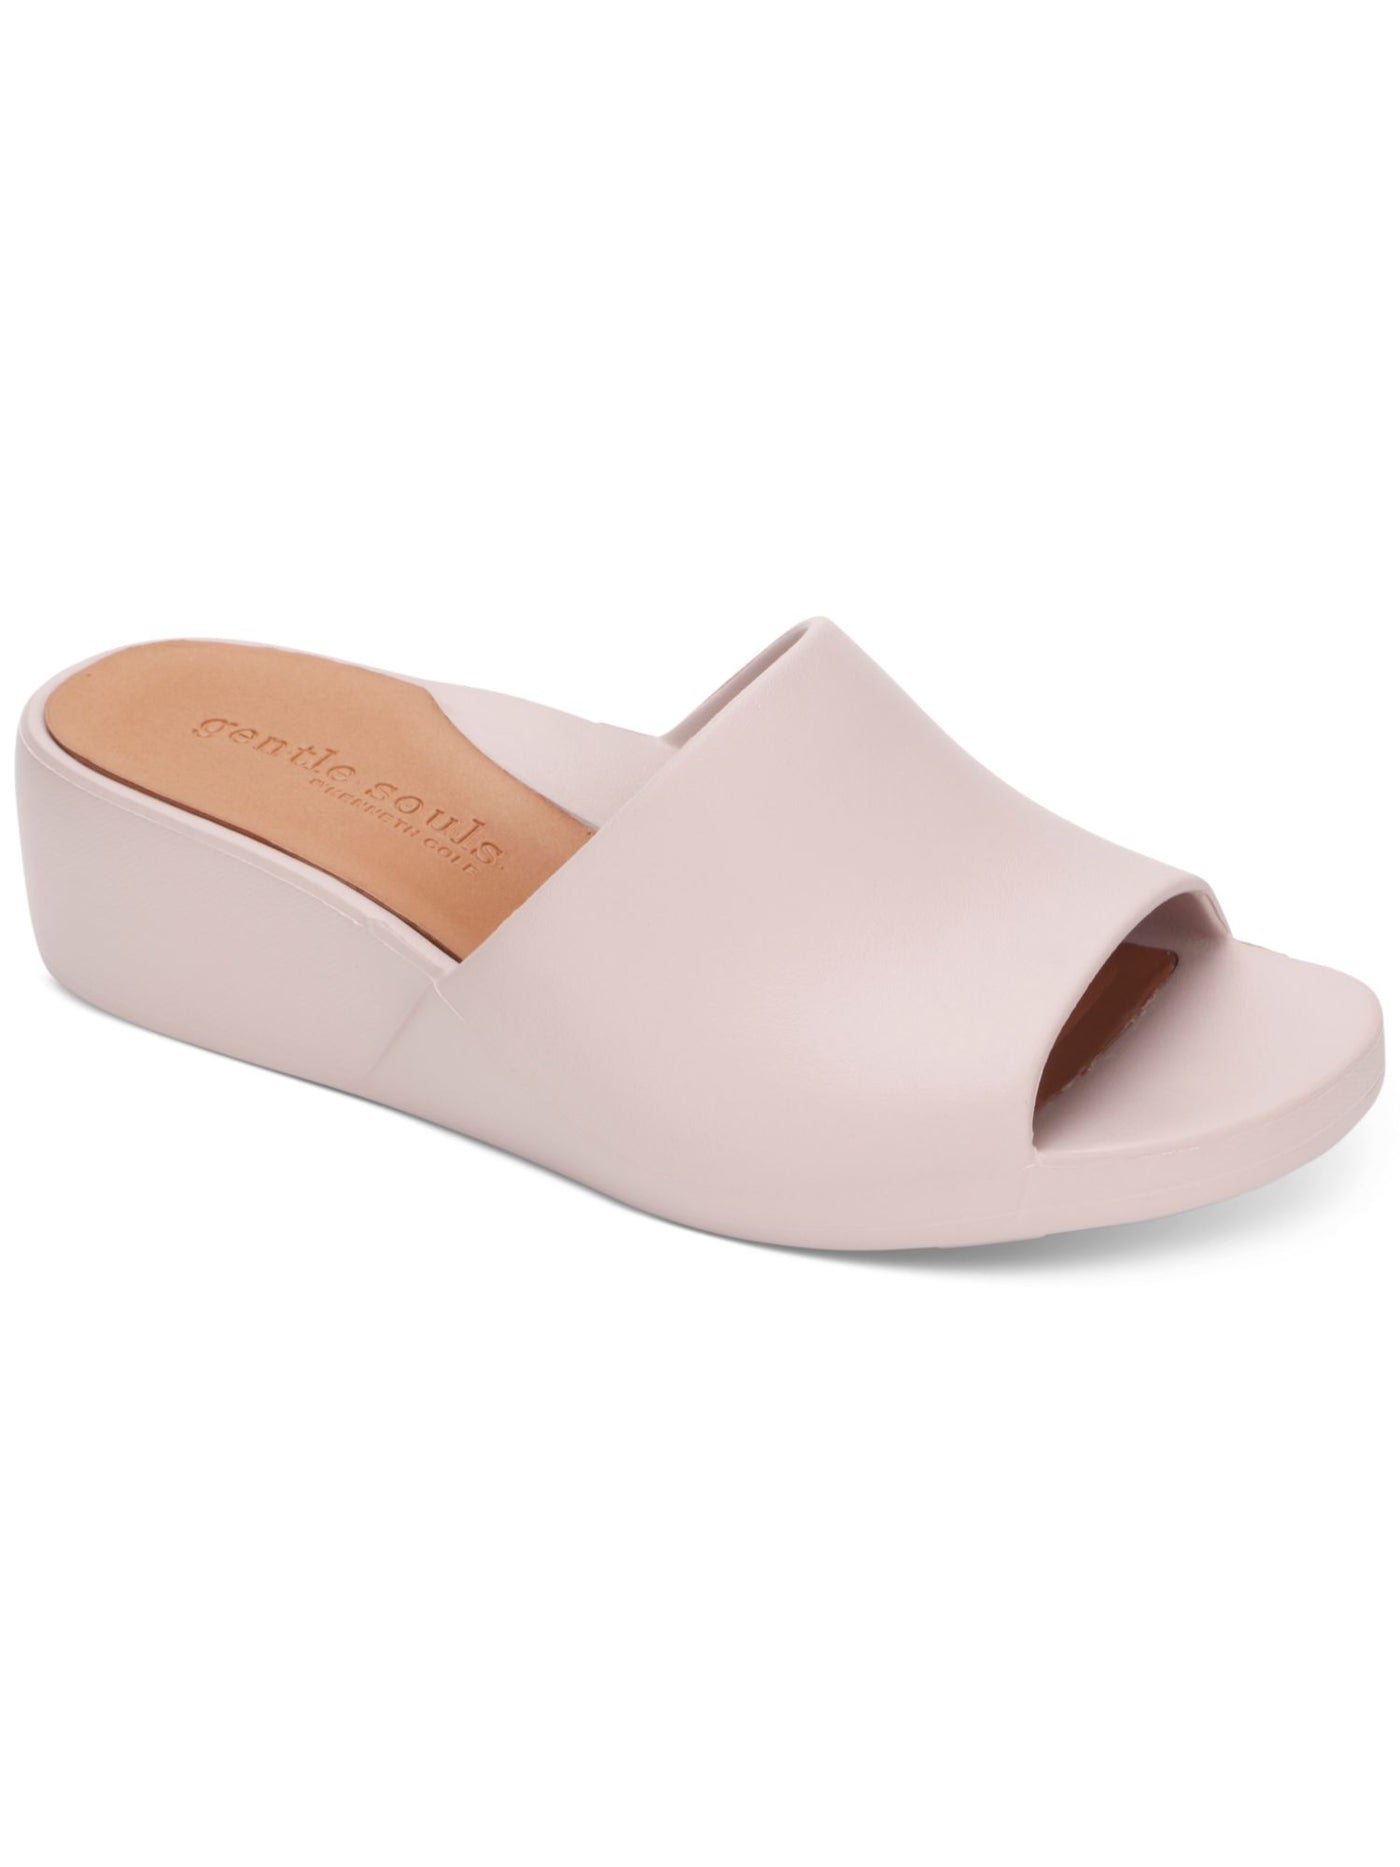 GENTLE SOULS KENNETH COLE Womens Pink Cushioned Arch Support Gisele Round Toe Wedge Slip On Slide Sandals Shoes 8